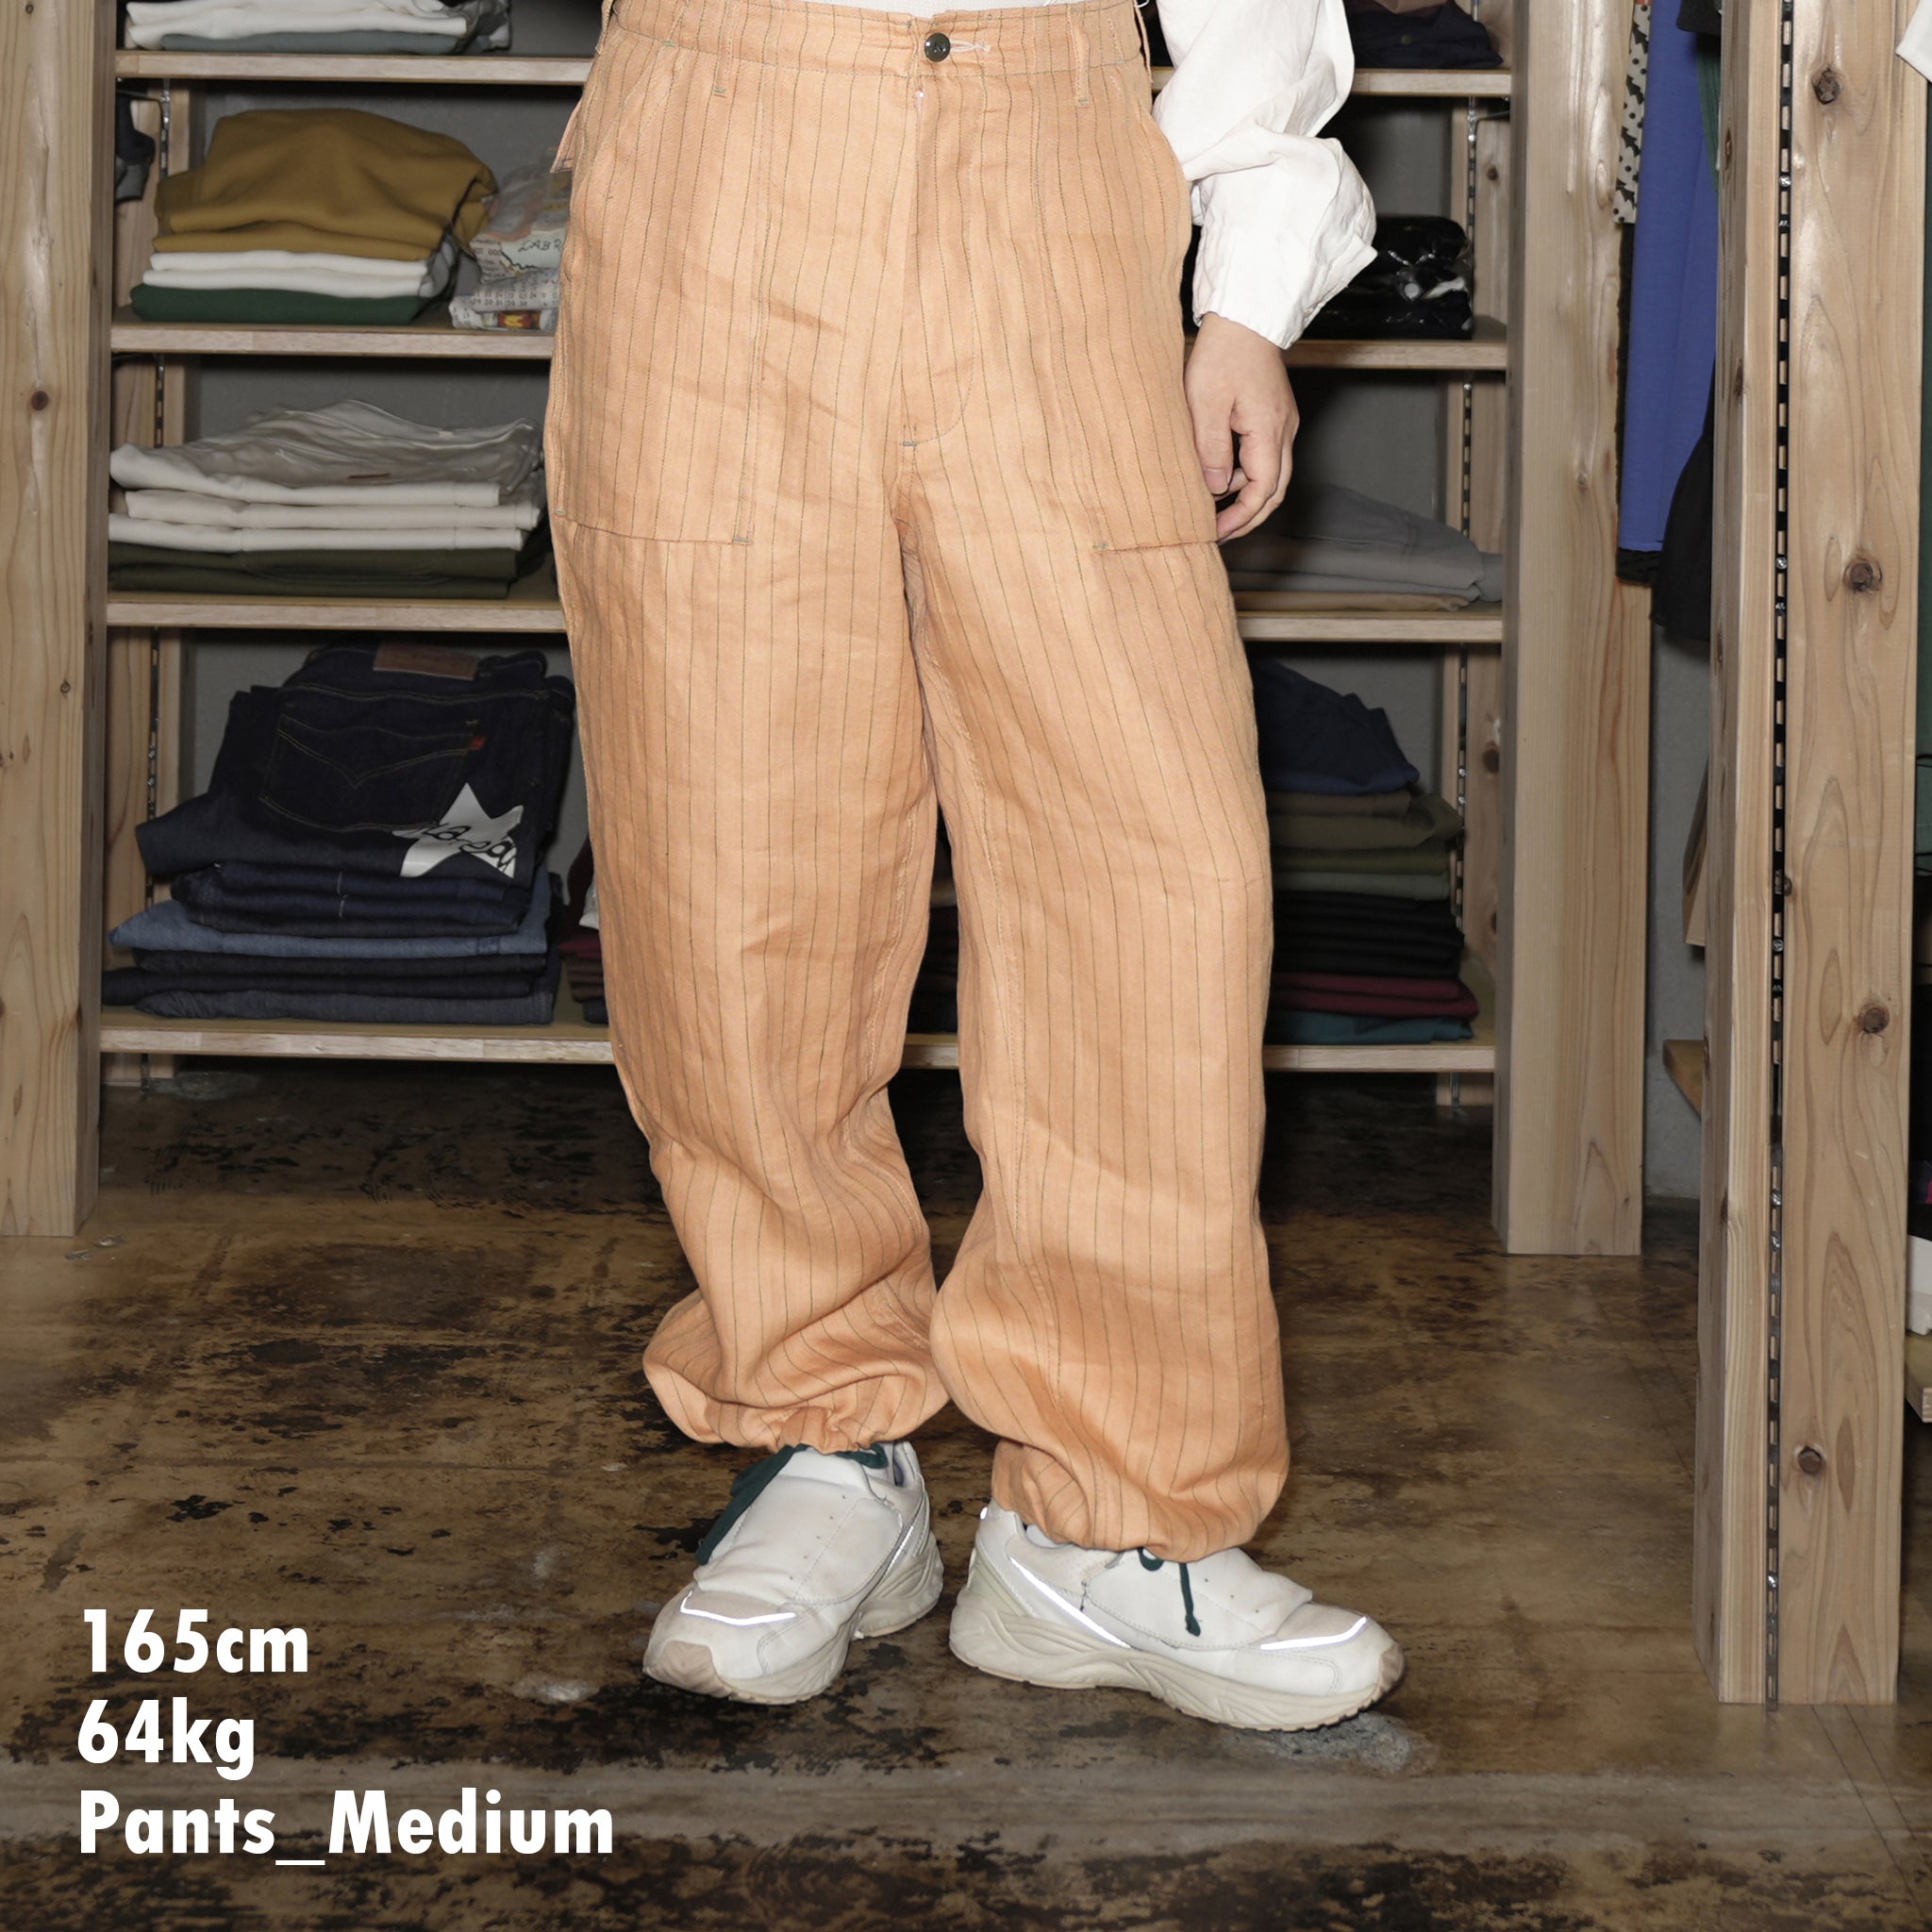 Name:1951 BAKER | Color:CORAL STRIPE | Size:M/L【CITYLIGHTS PRODUCTS_シティライツプロダクツ】